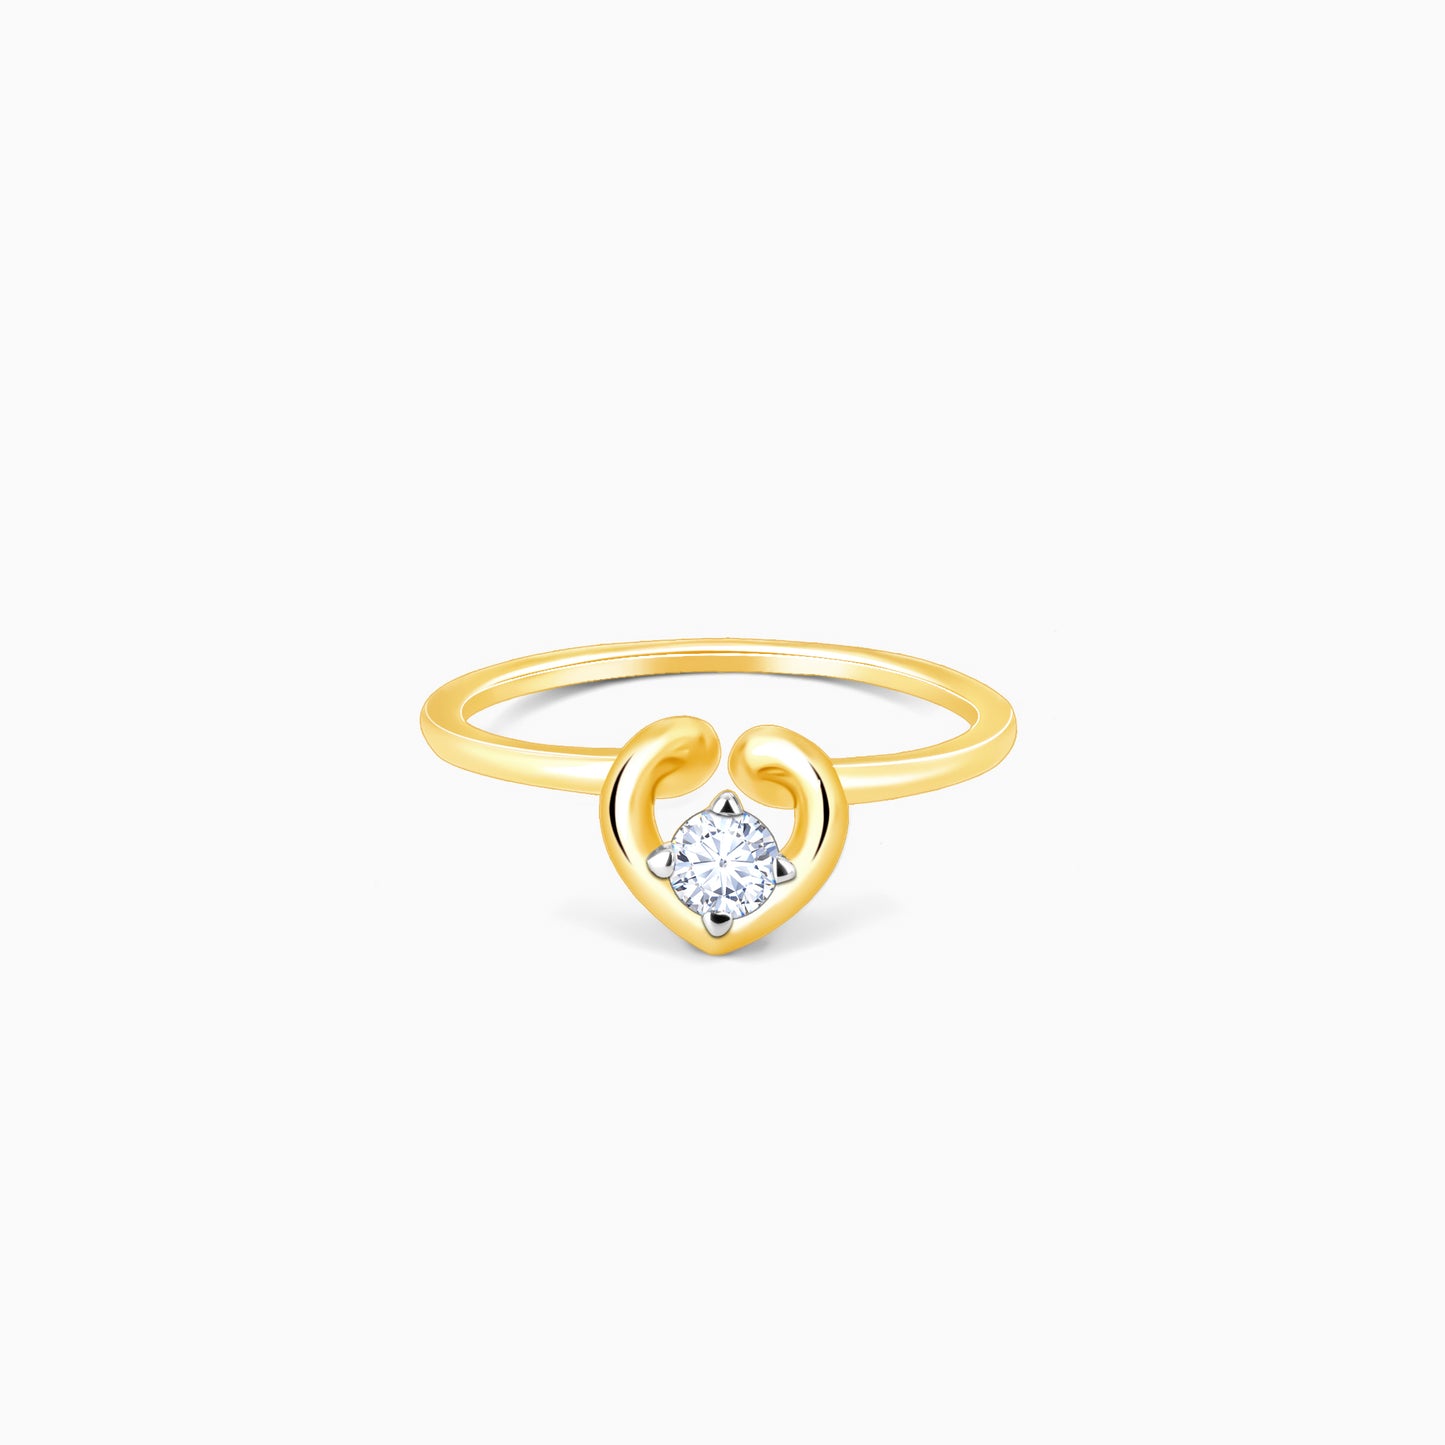 Gold Symphony Of Love Solitaire Diamond Ring